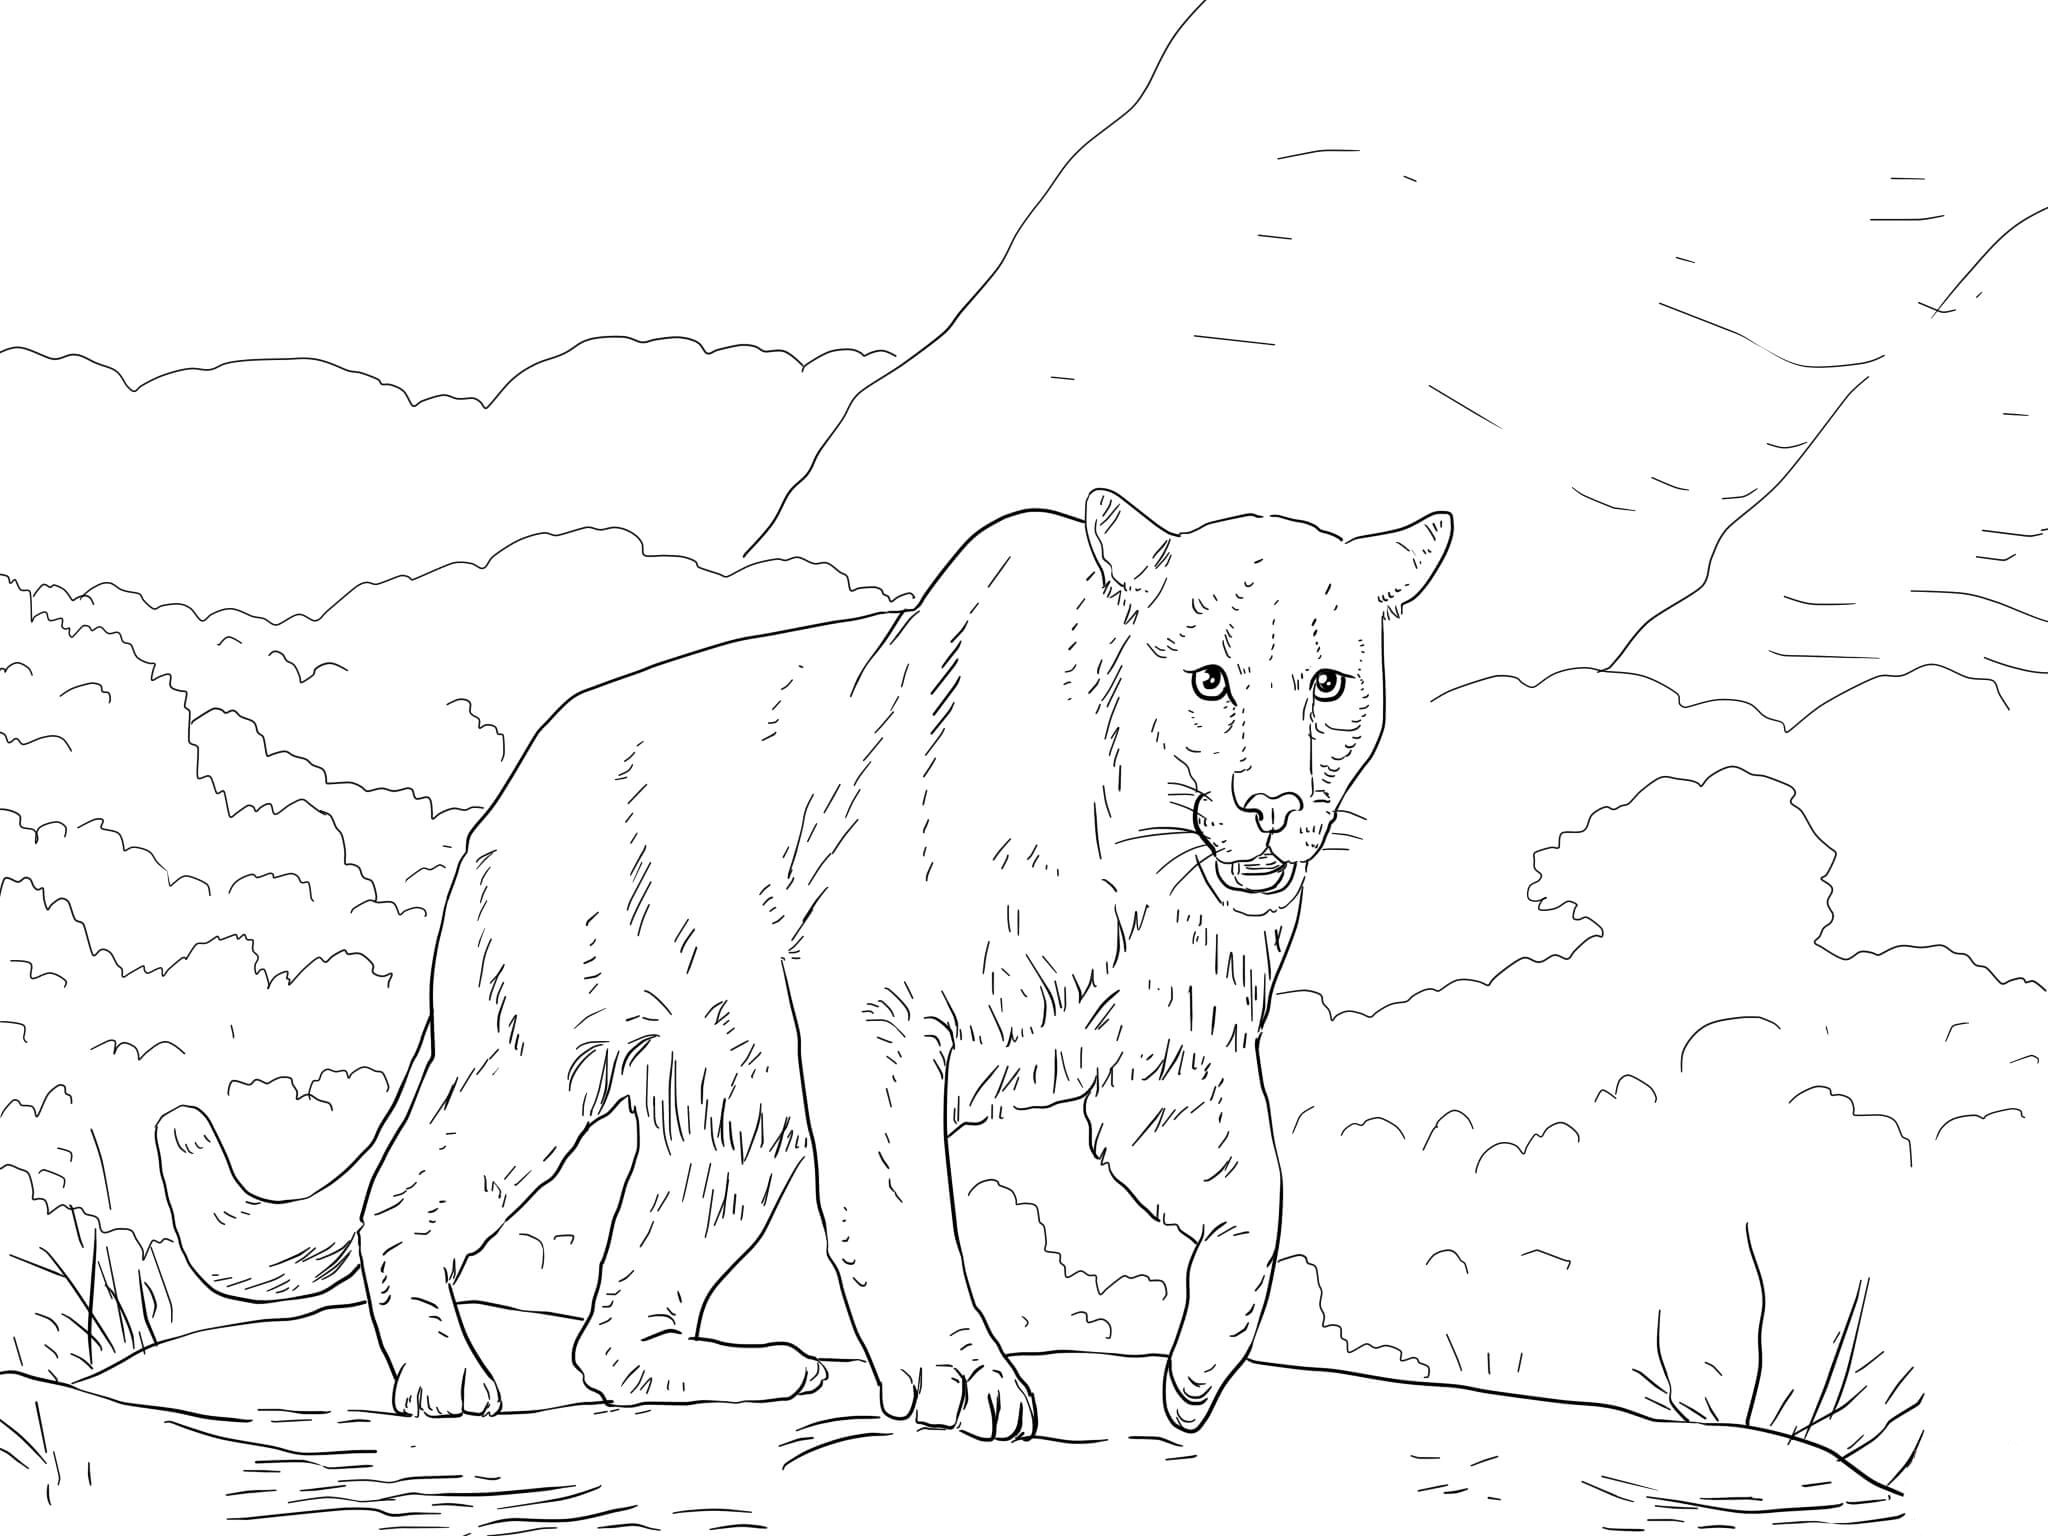 Puma coloring pages to download and print for free